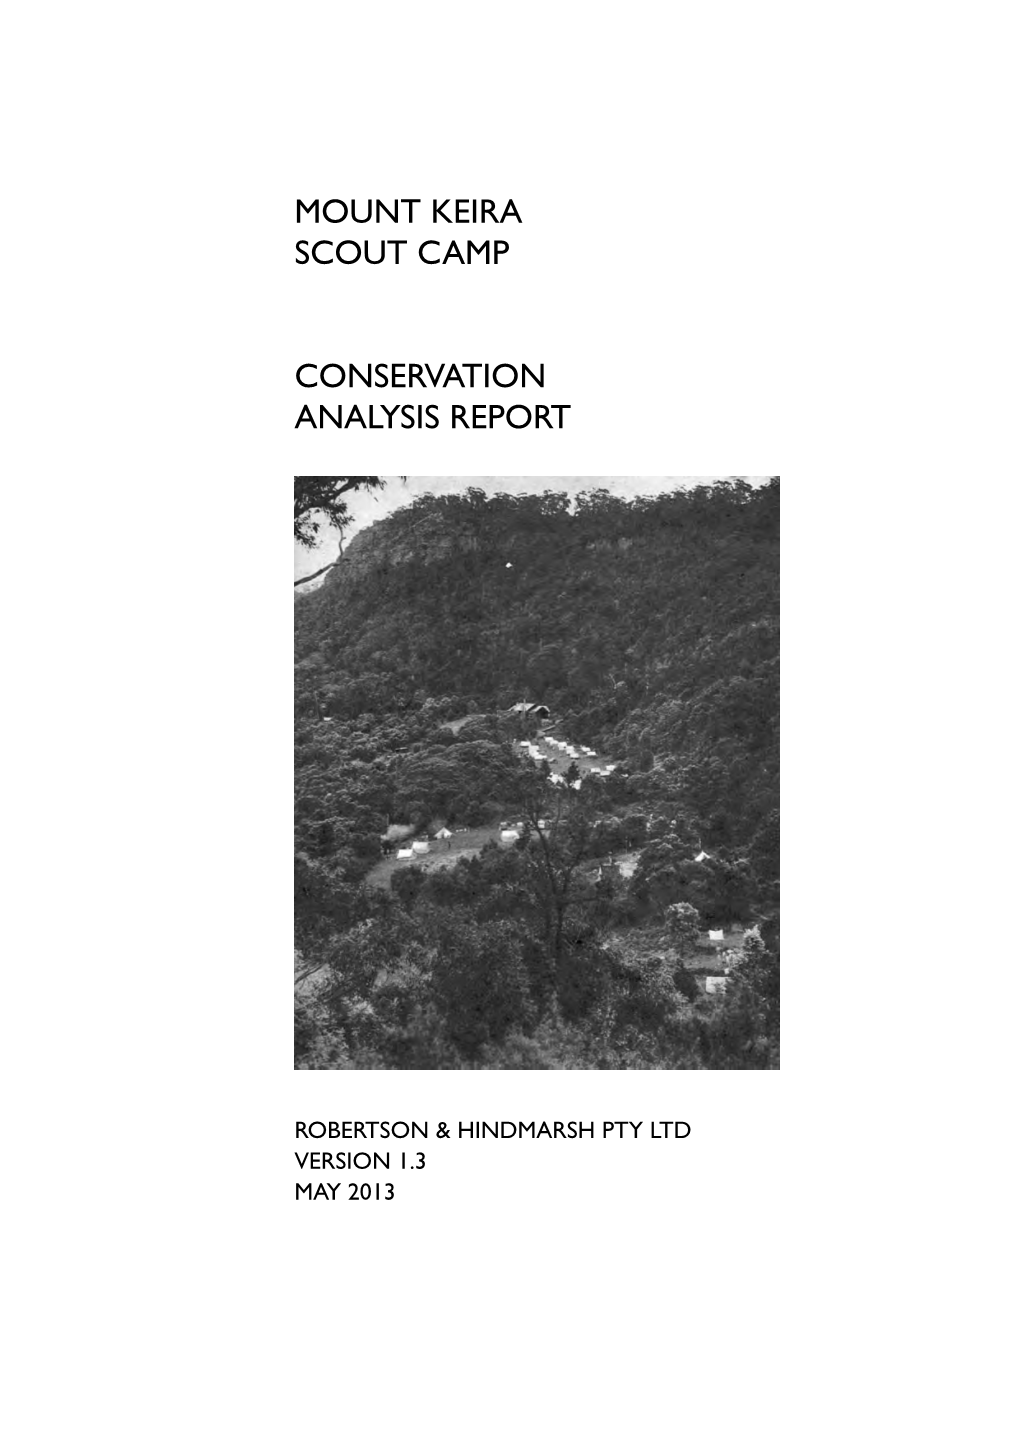 Mount Keira Scout Camp: Conservation Analysis Report